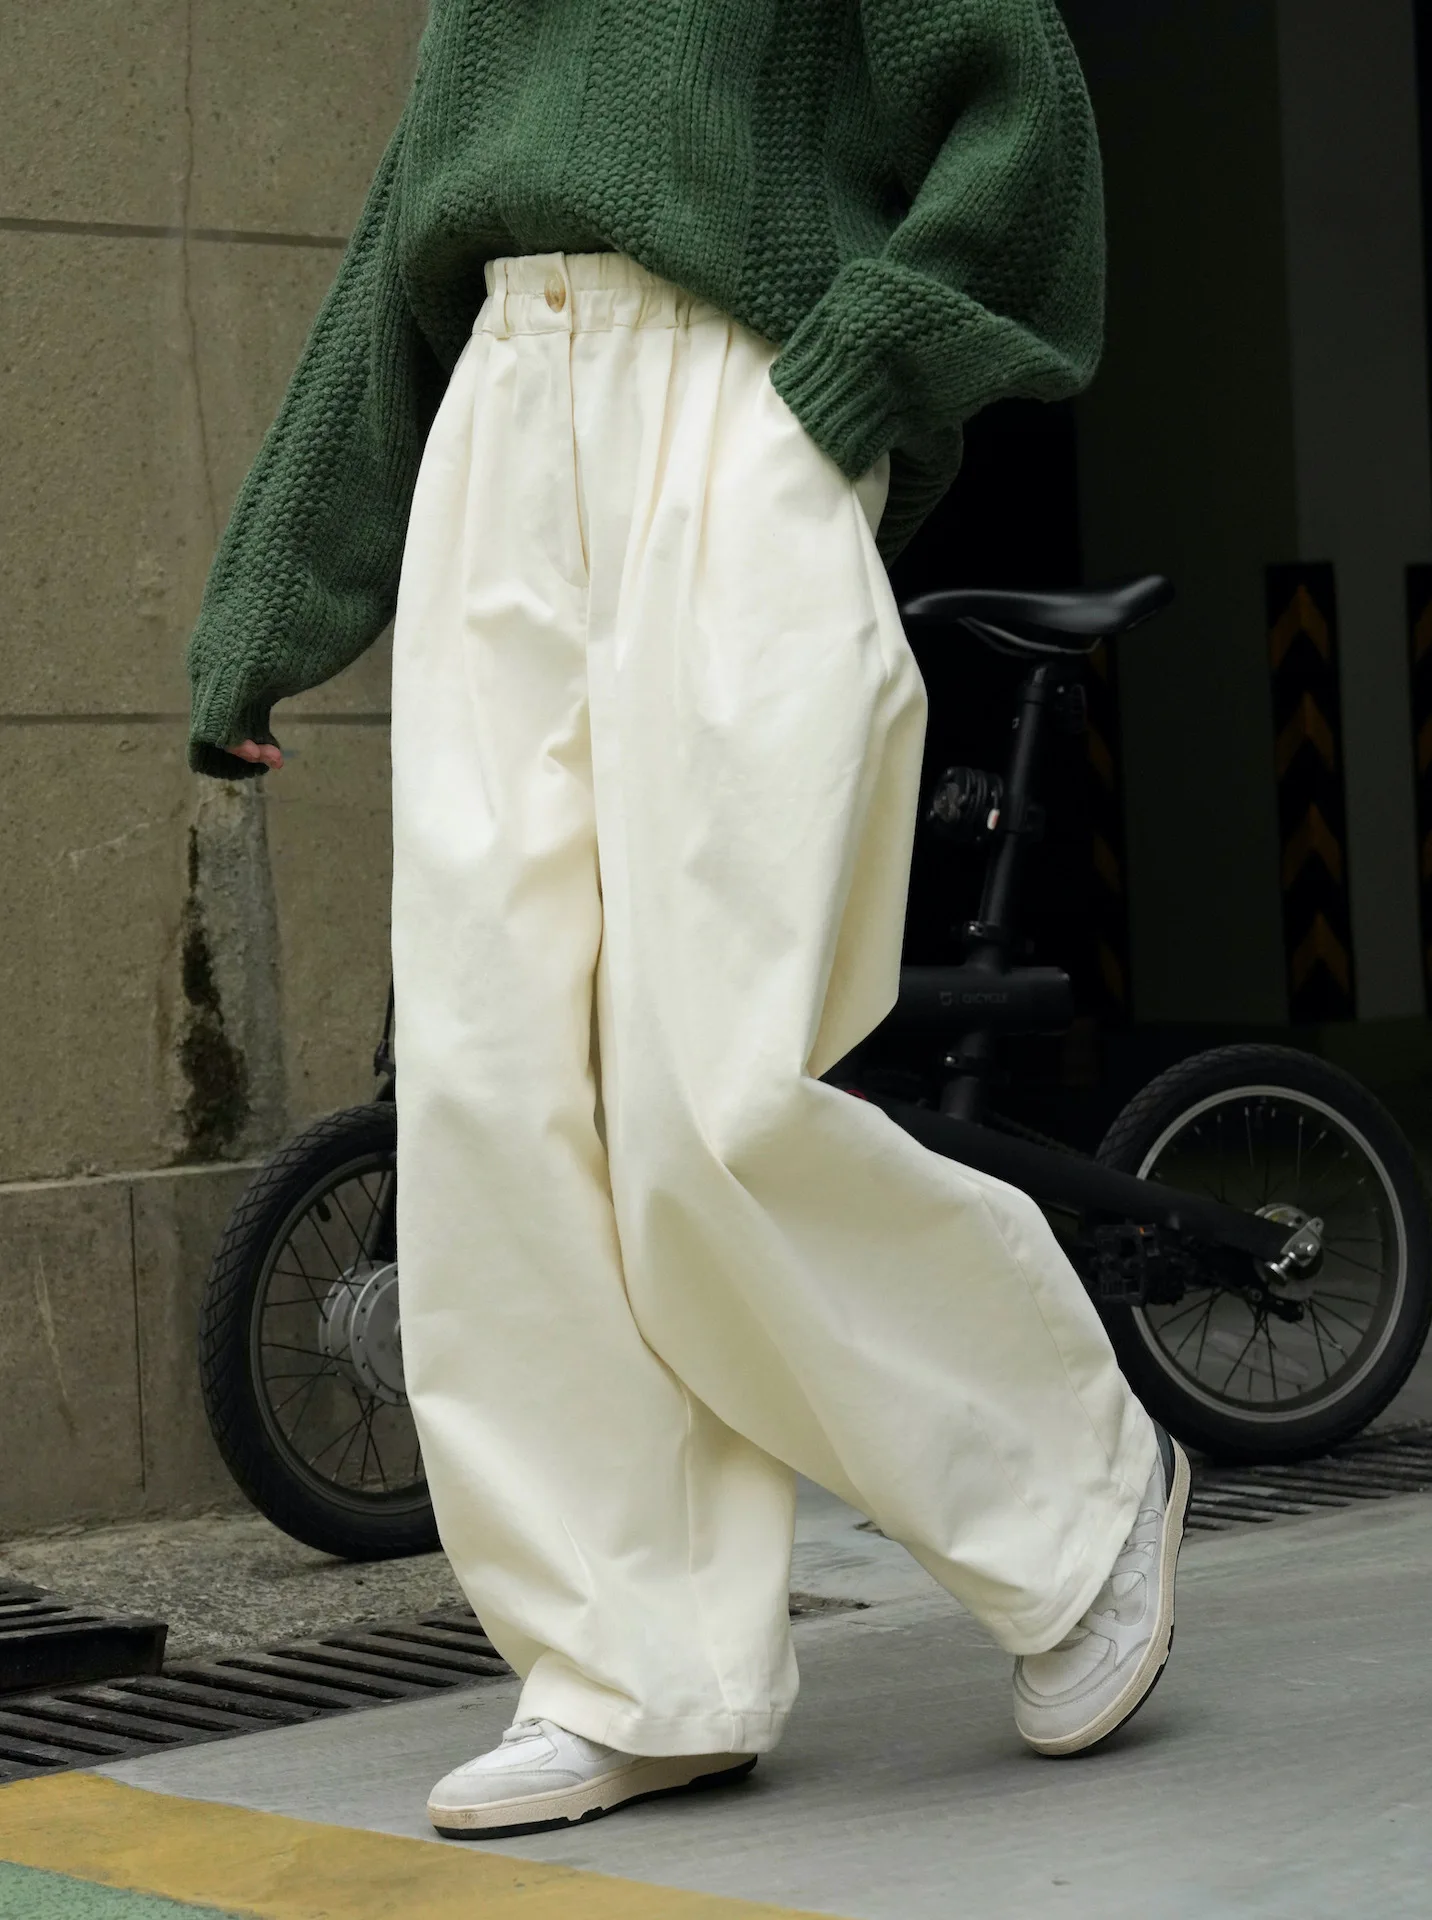 Women's casual solid color high waist loose wide leg pants in autumn and winter